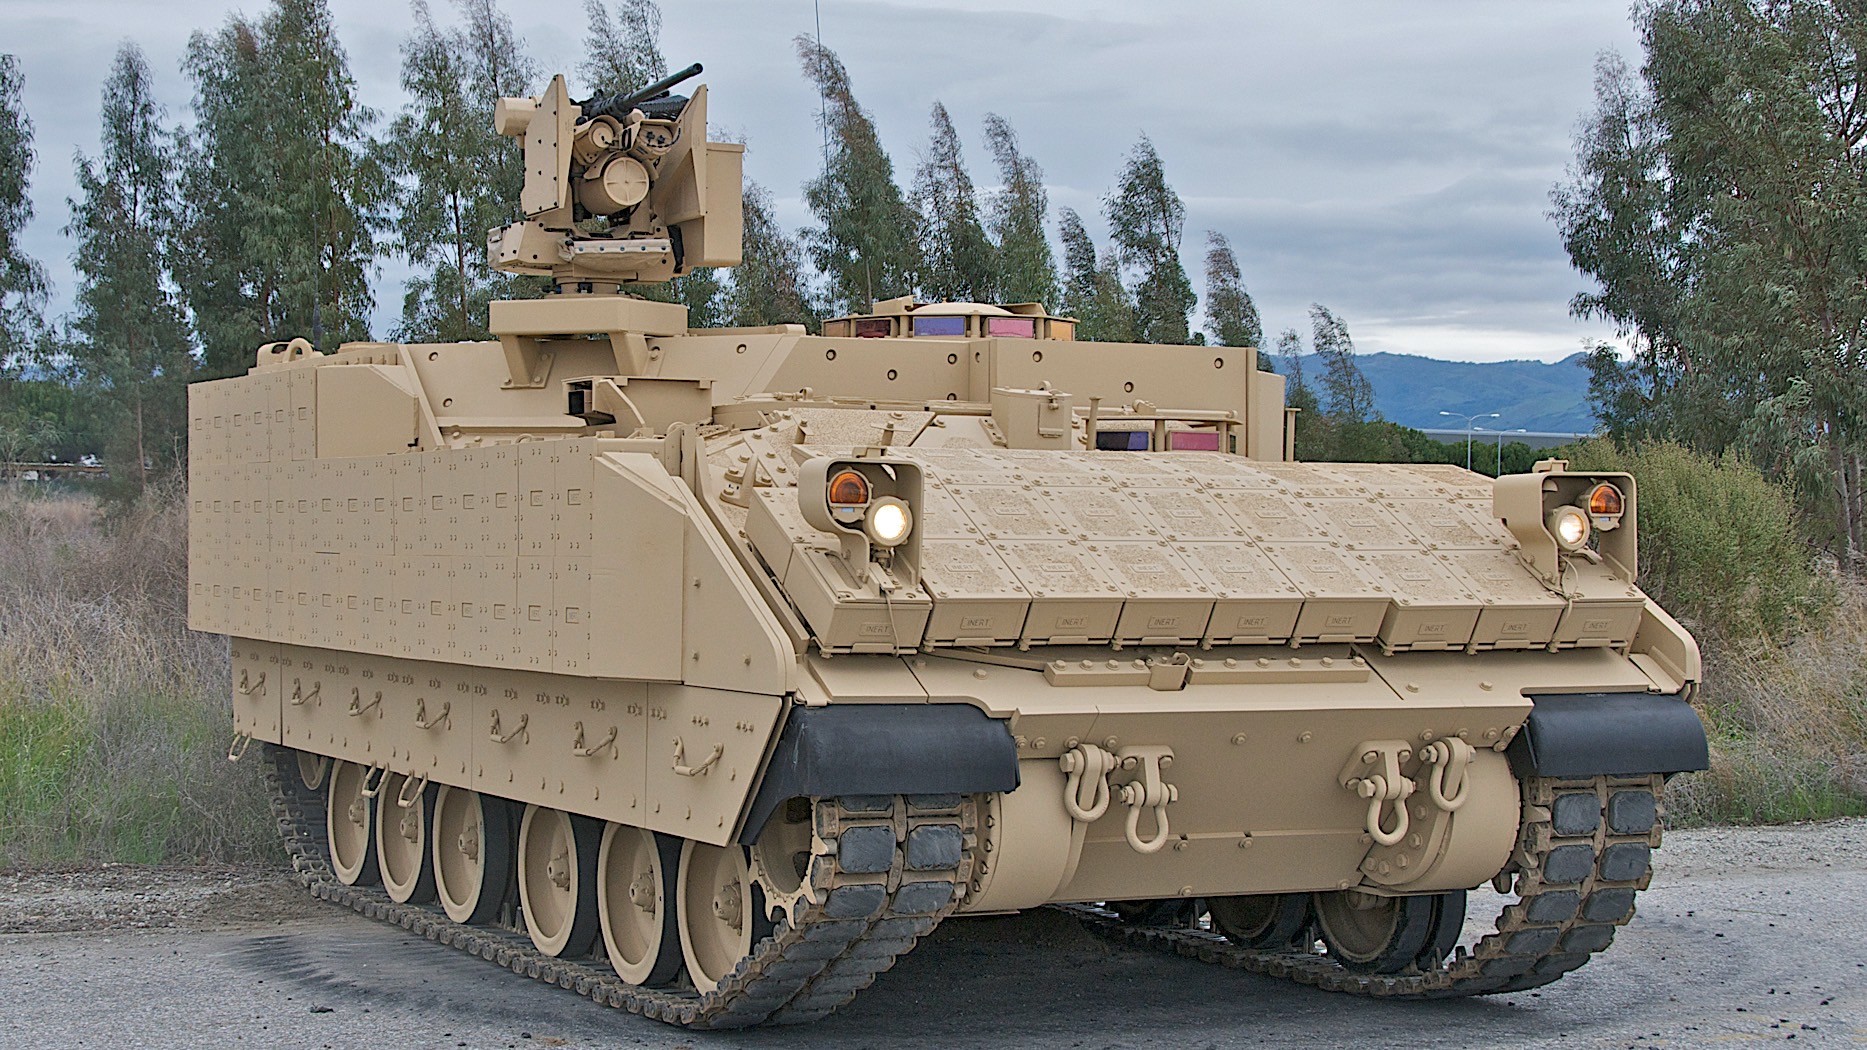 U.S. Army to Begin Operational Testing of M113 Armored Vehicle